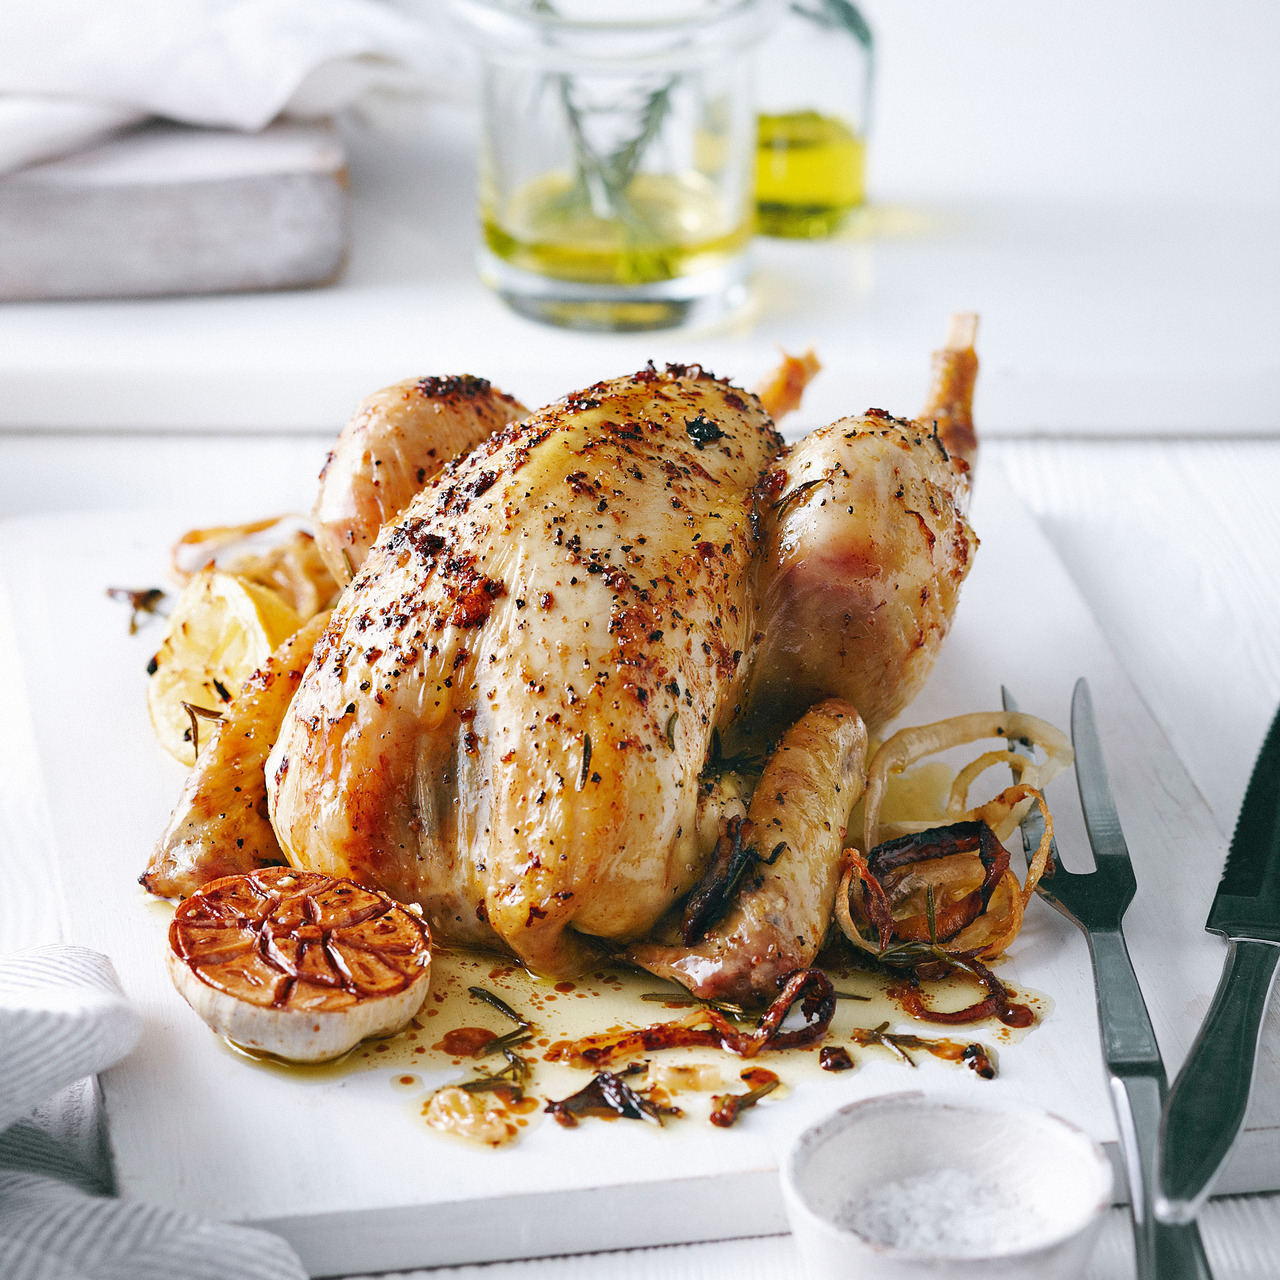 Lemon and rosemary roast chicken | Cook With M&S